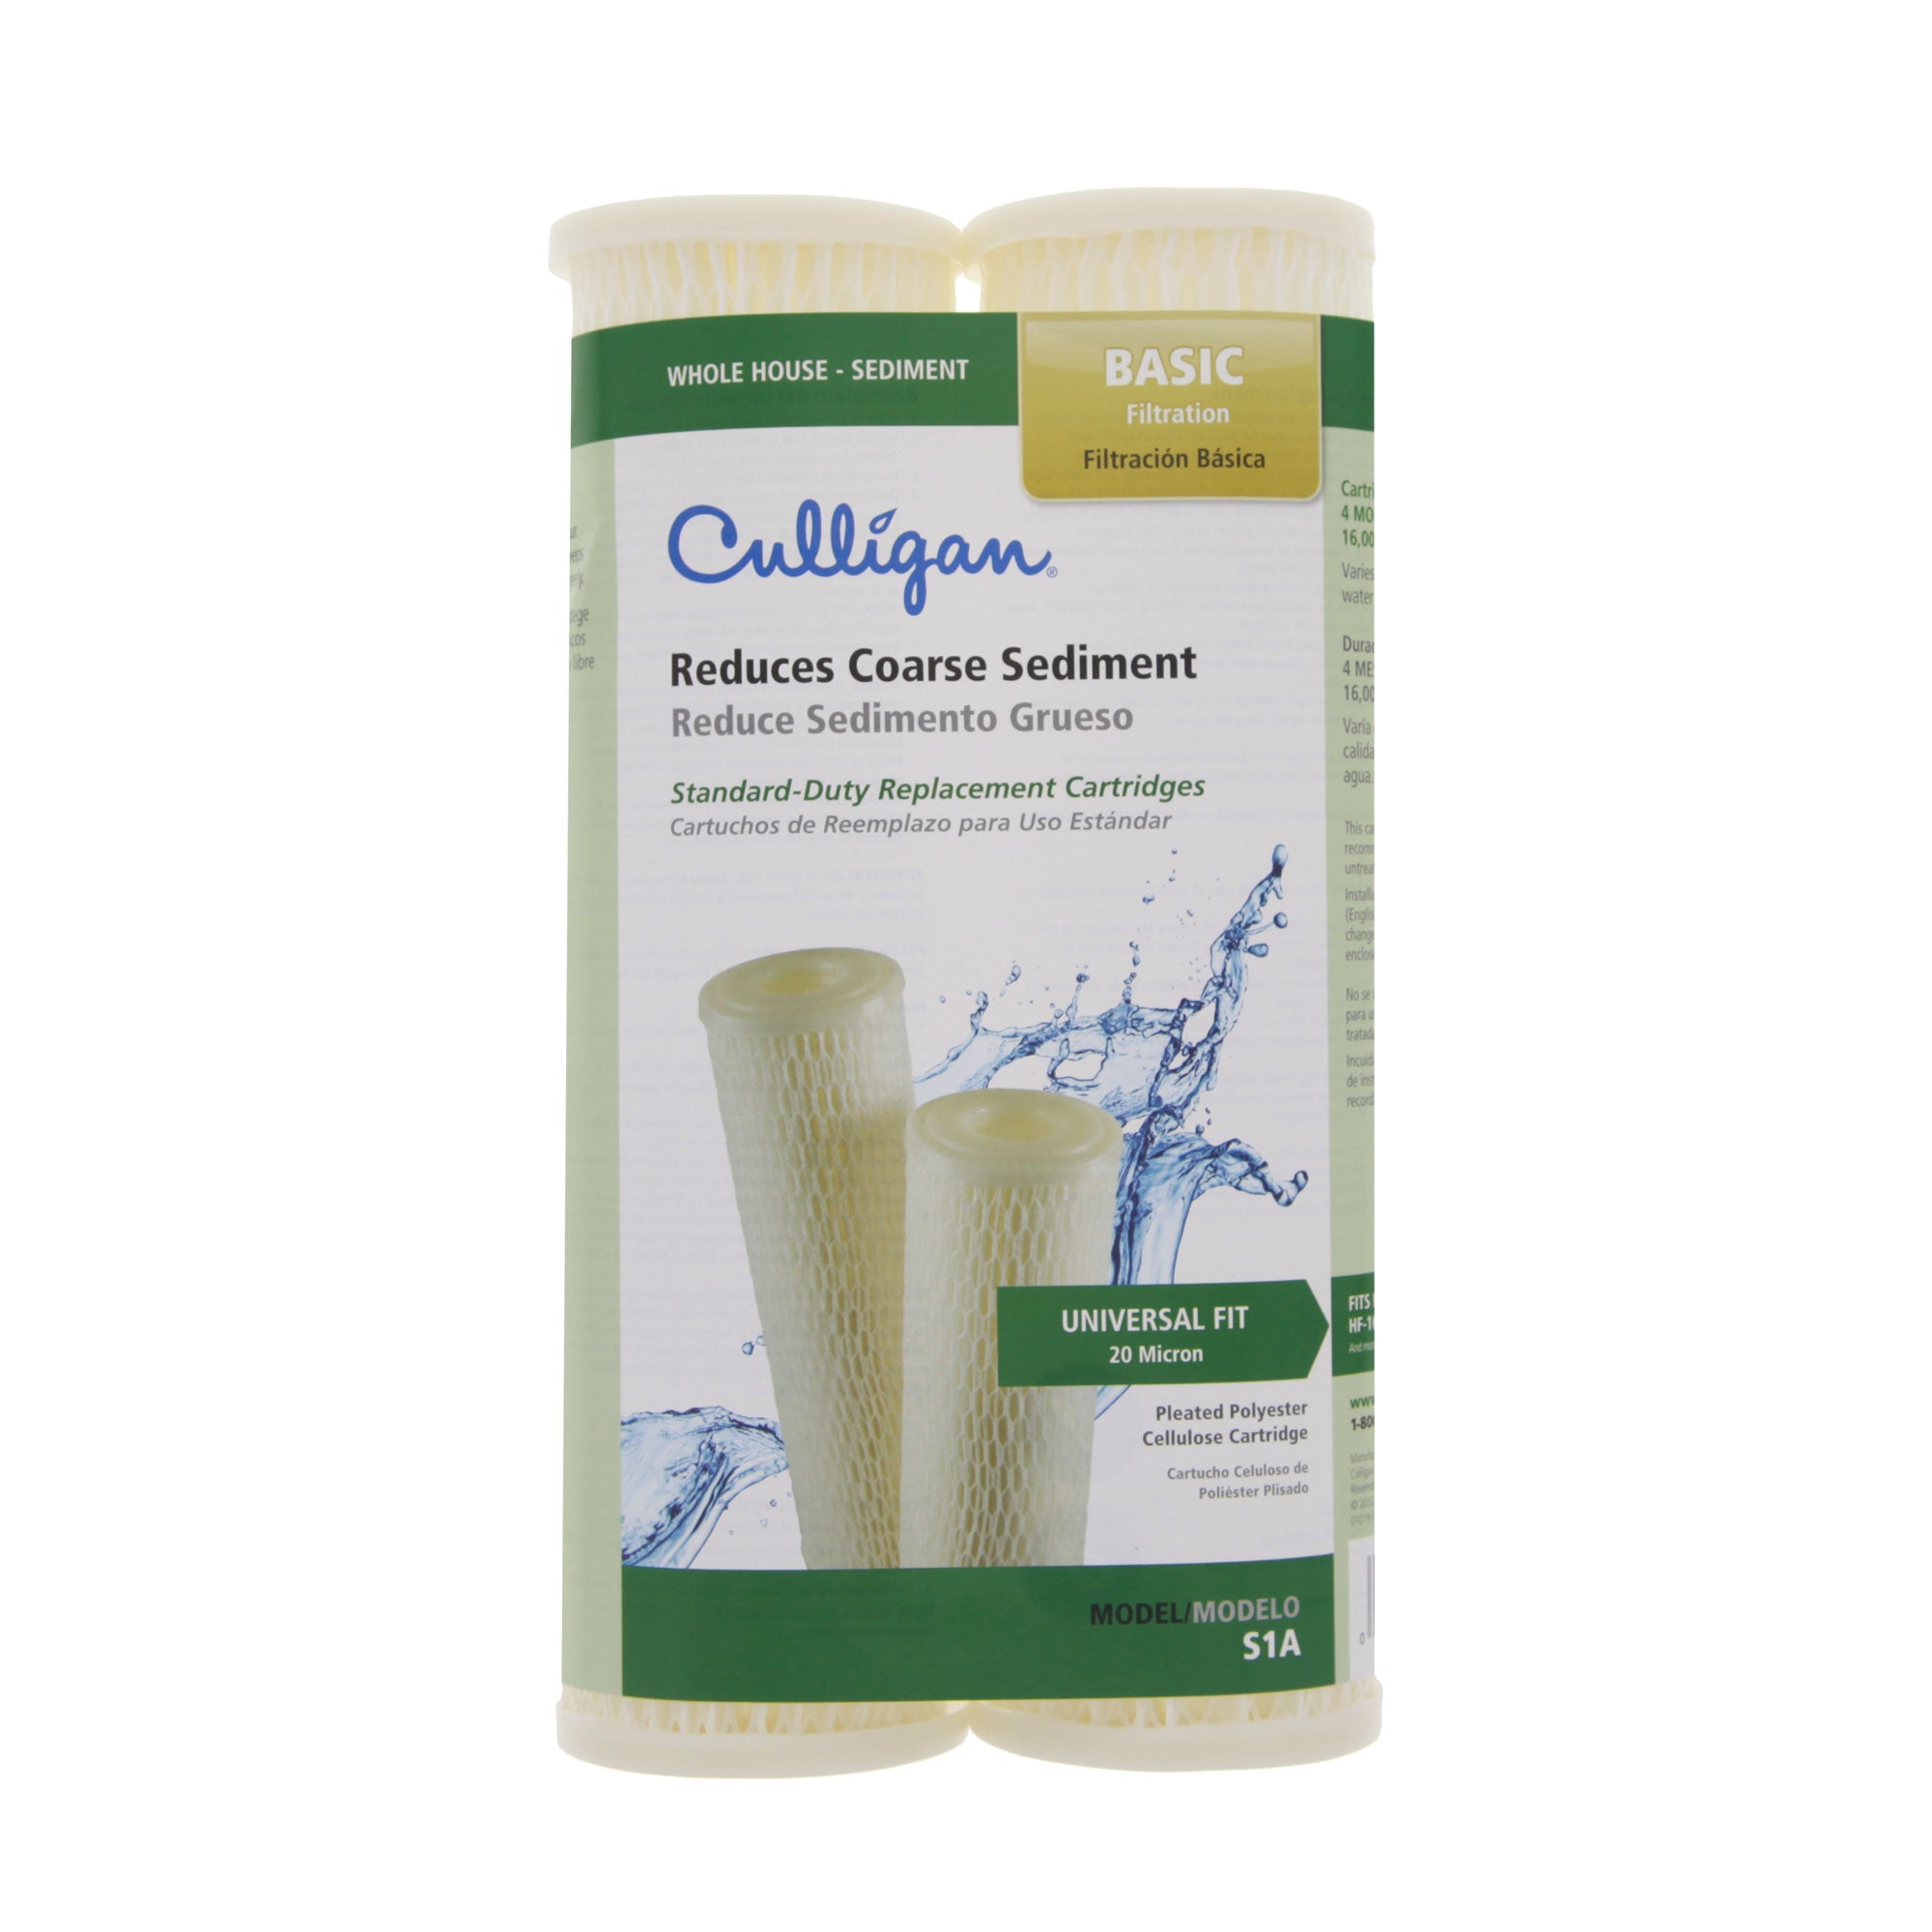 S1A Culligan Level 2 Whole House Filter Replacement Cartridge (2-Pack)